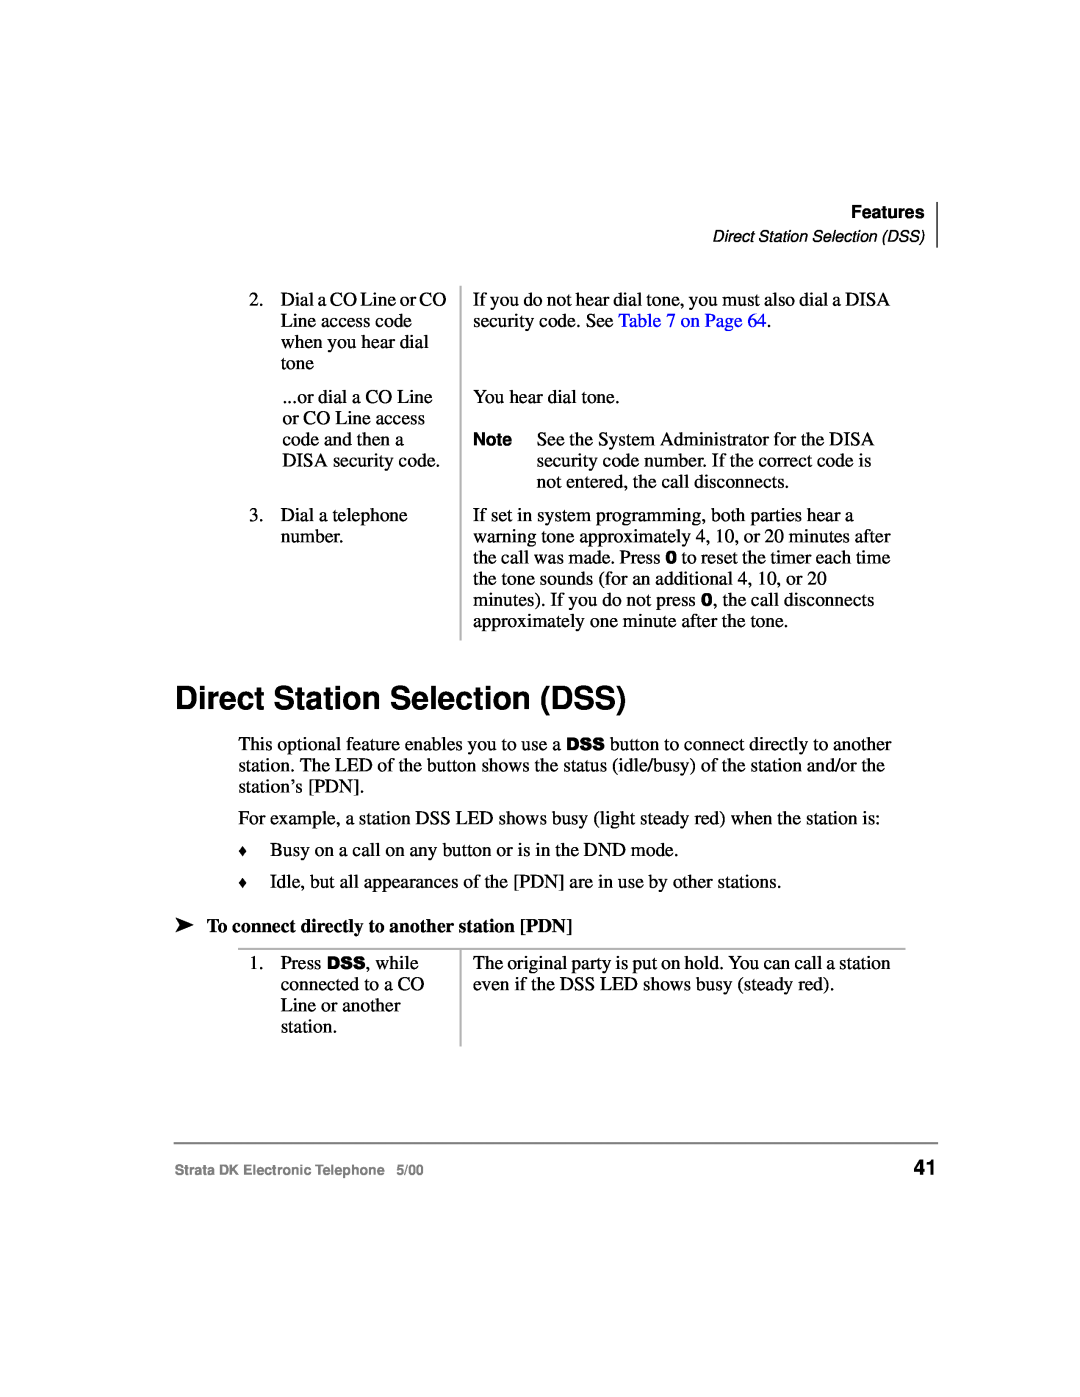 Toshiba Strata DK manual Direct Station Selection DSS, To connect directly to another station PDN 